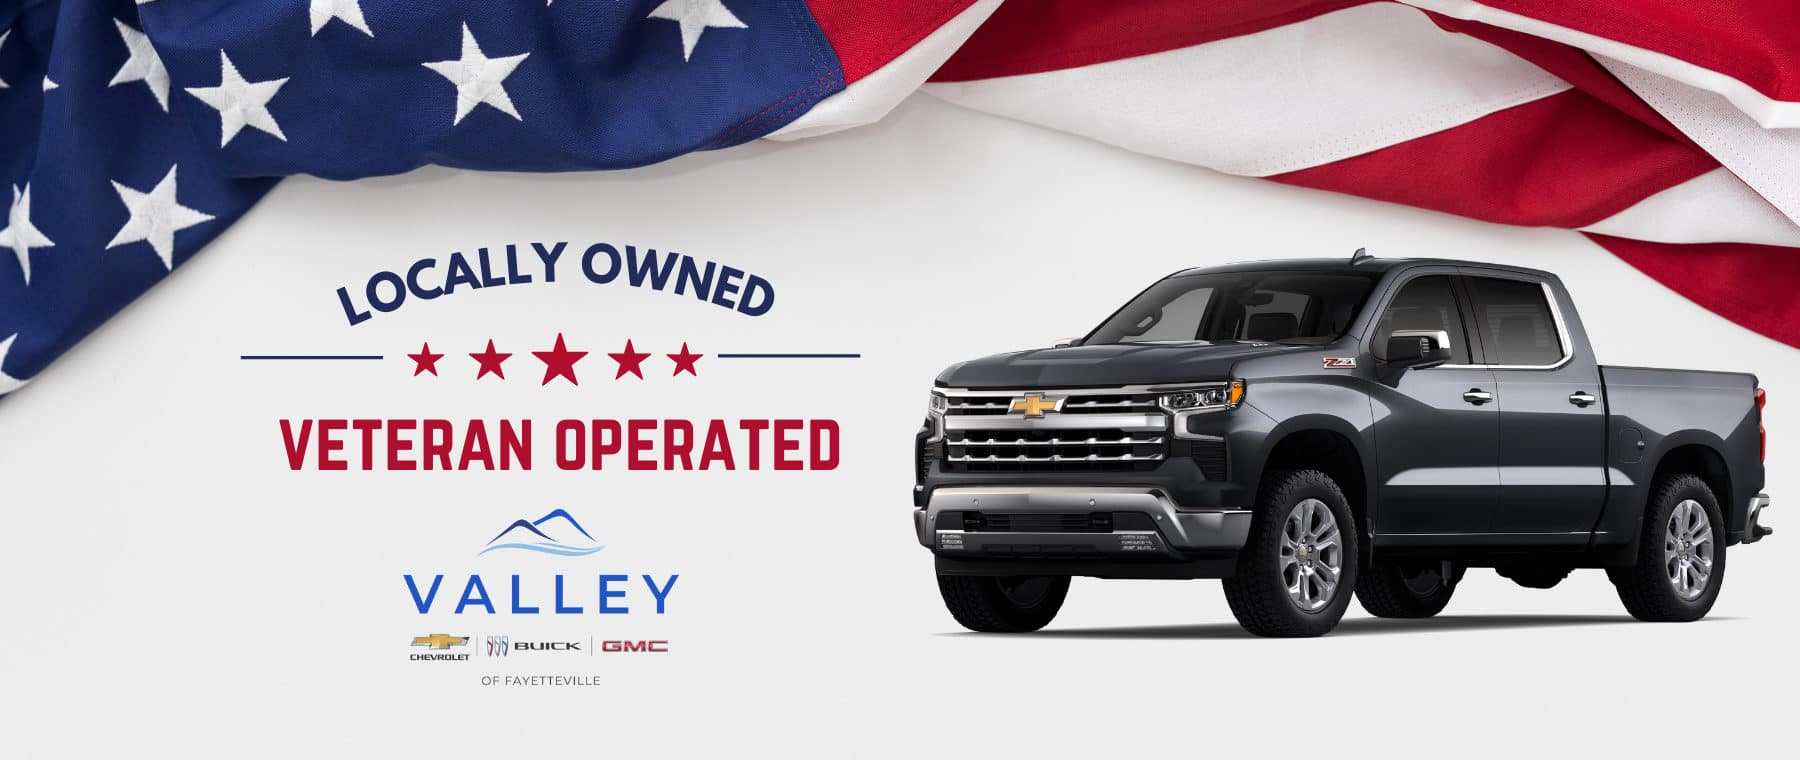 Valley Locally Owned, Veteran Operated